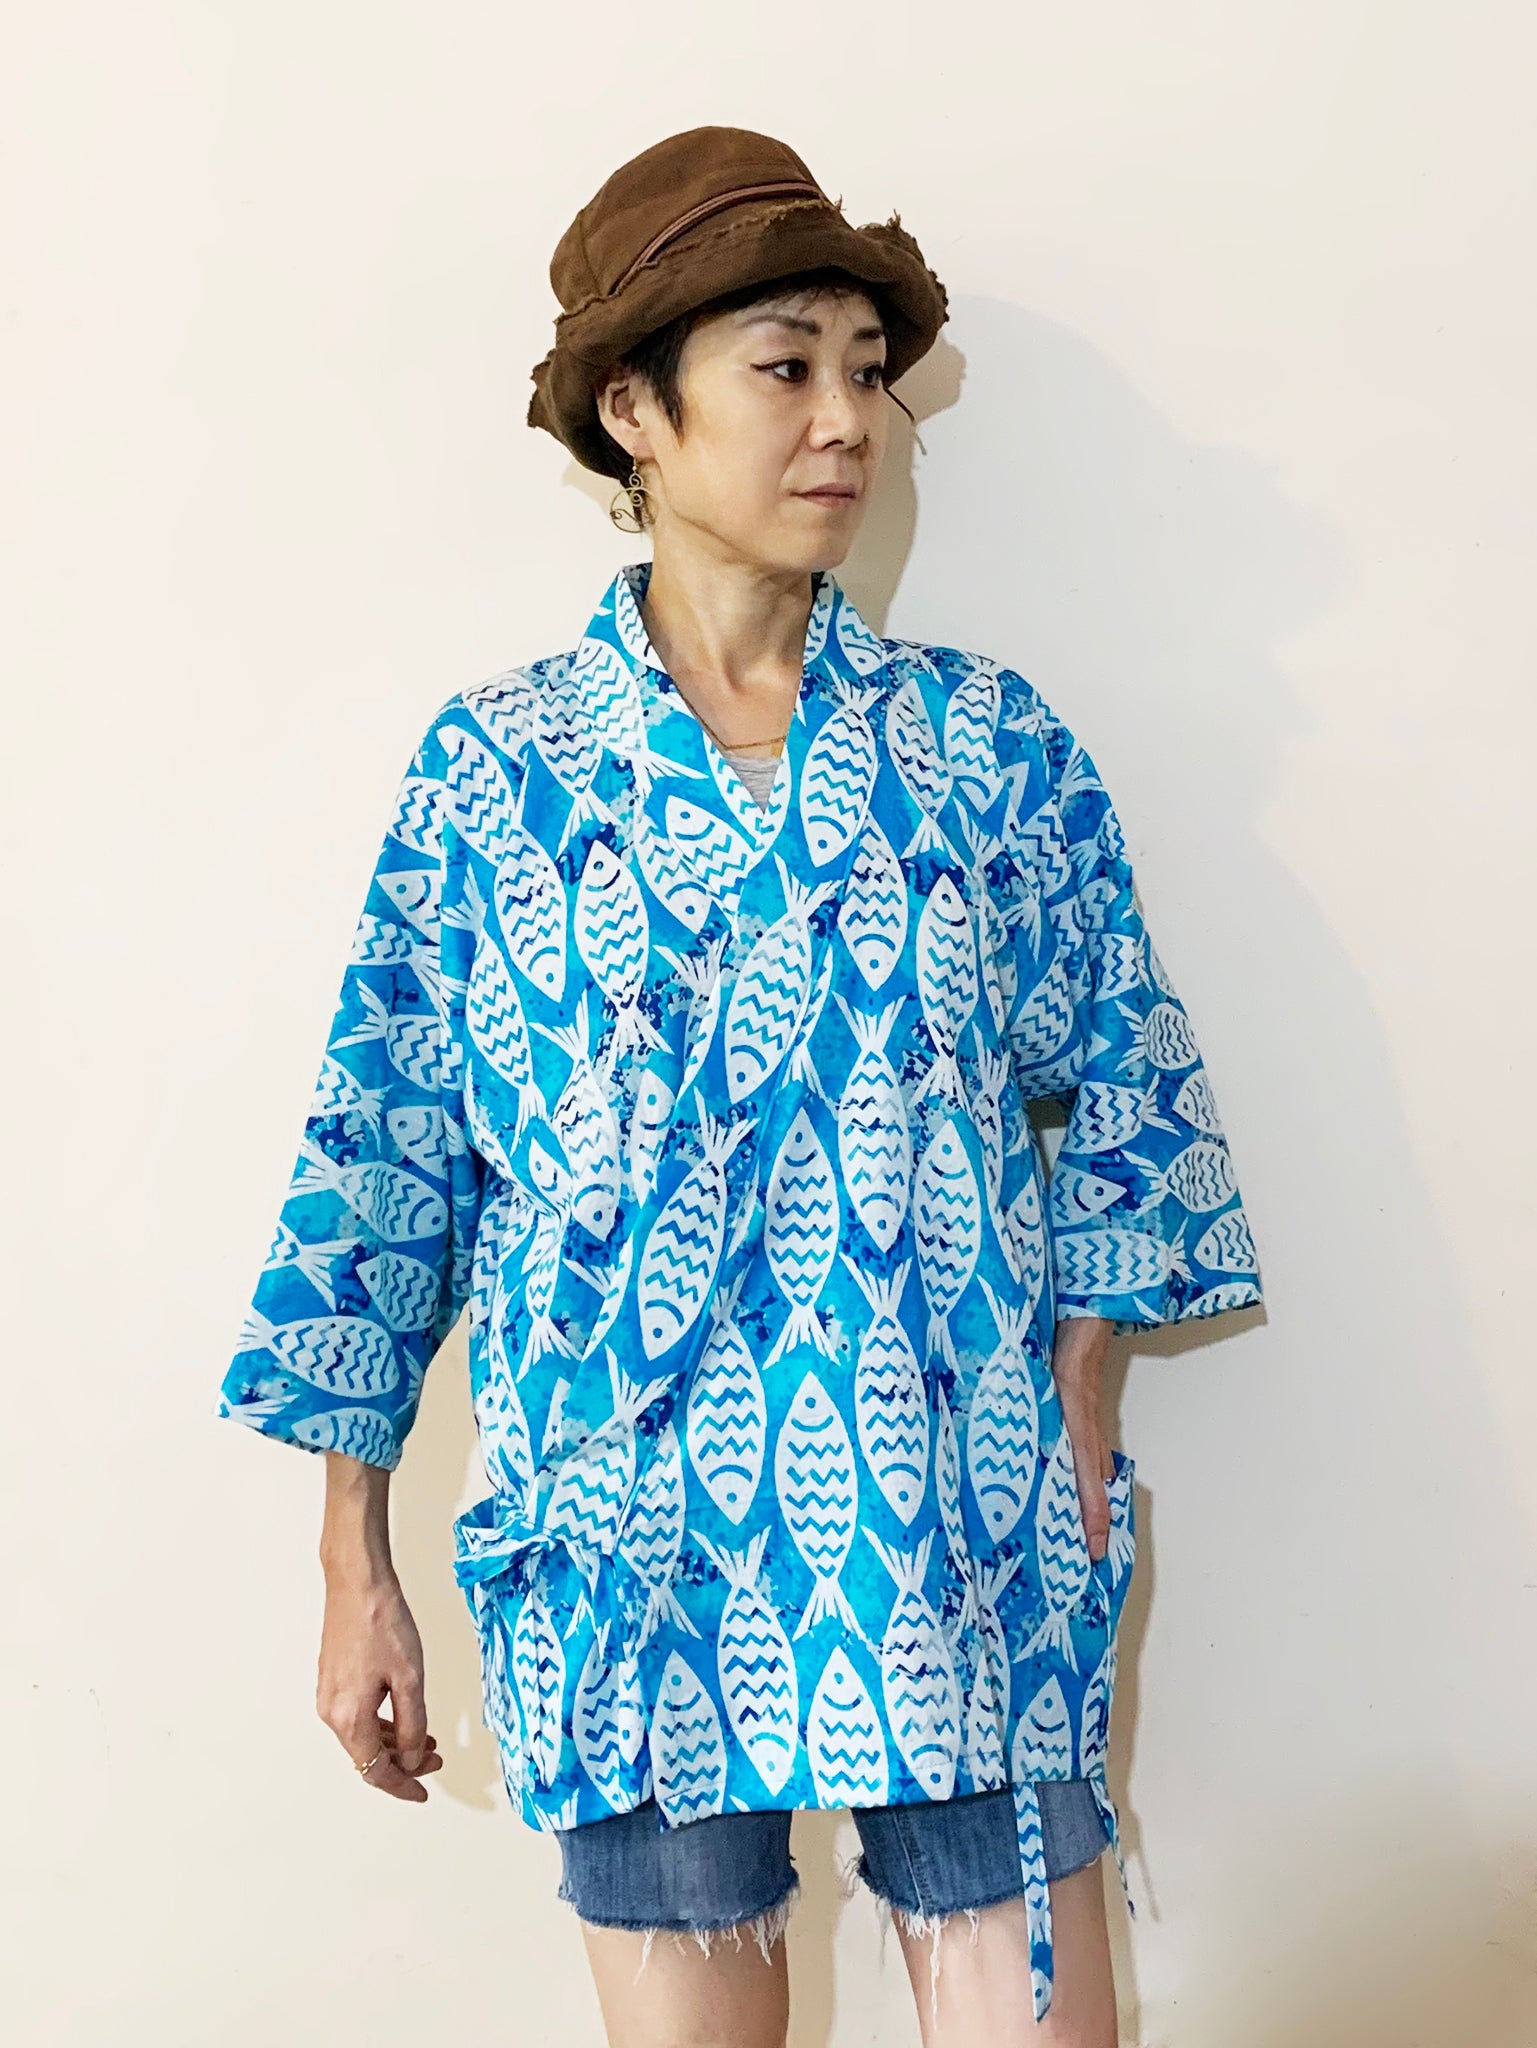 Introducing the first item of Japanese-inspired clothing from MIRCHI KOMACHI - the Jinbei Jacket! Made of breathable cotton and printed with a refreshing ocean fish pattern, this jacket is perfect for staying cool during hot summer days. Pockets? Hell yeah! Shop online.